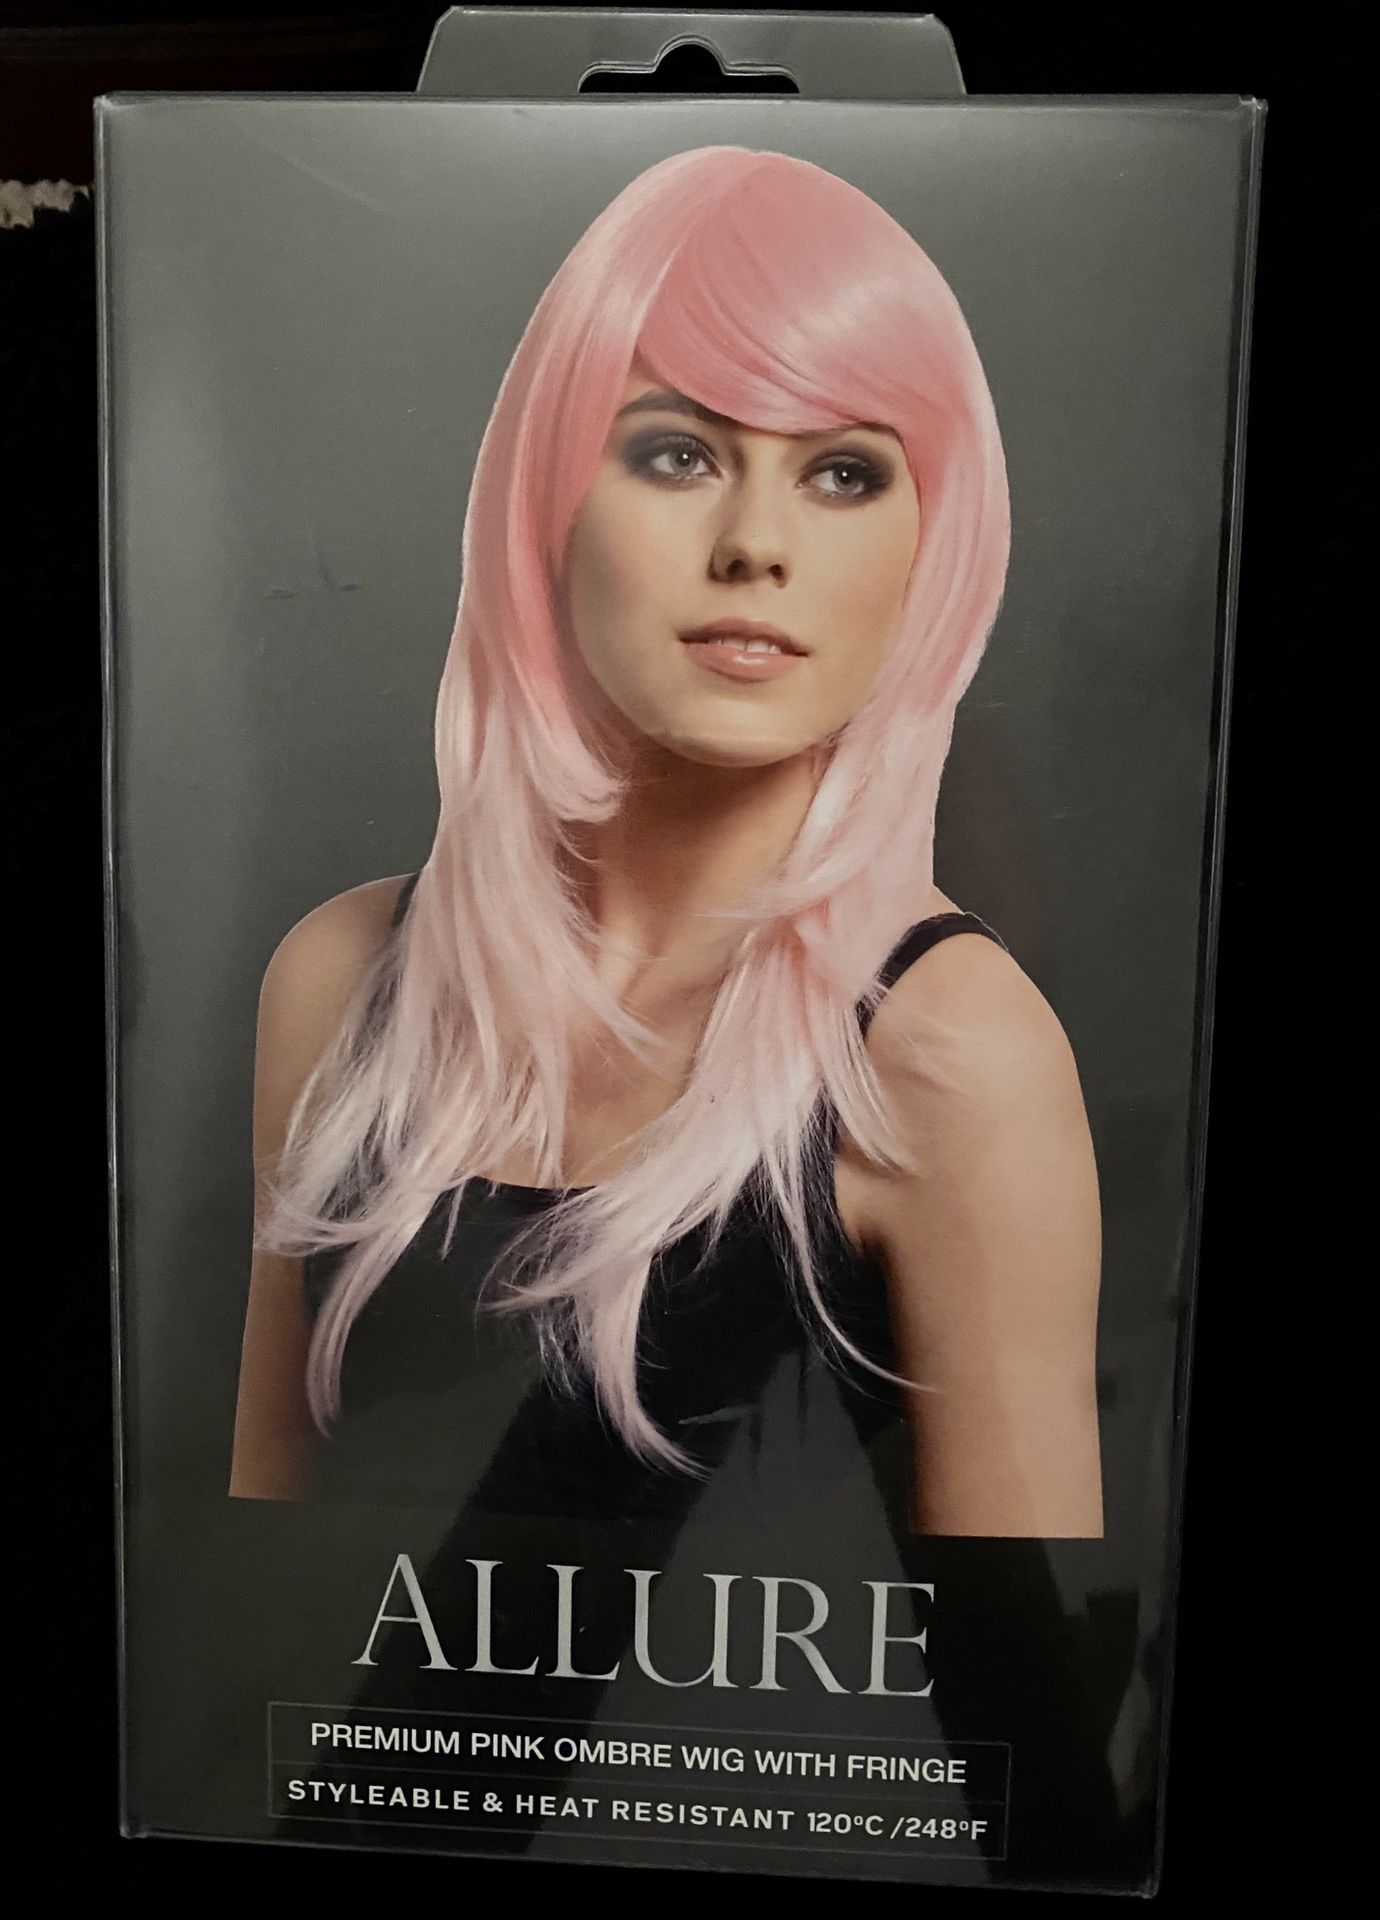 New Allure Premium Pink Ombre Wig with Fringe Heatable Styleable